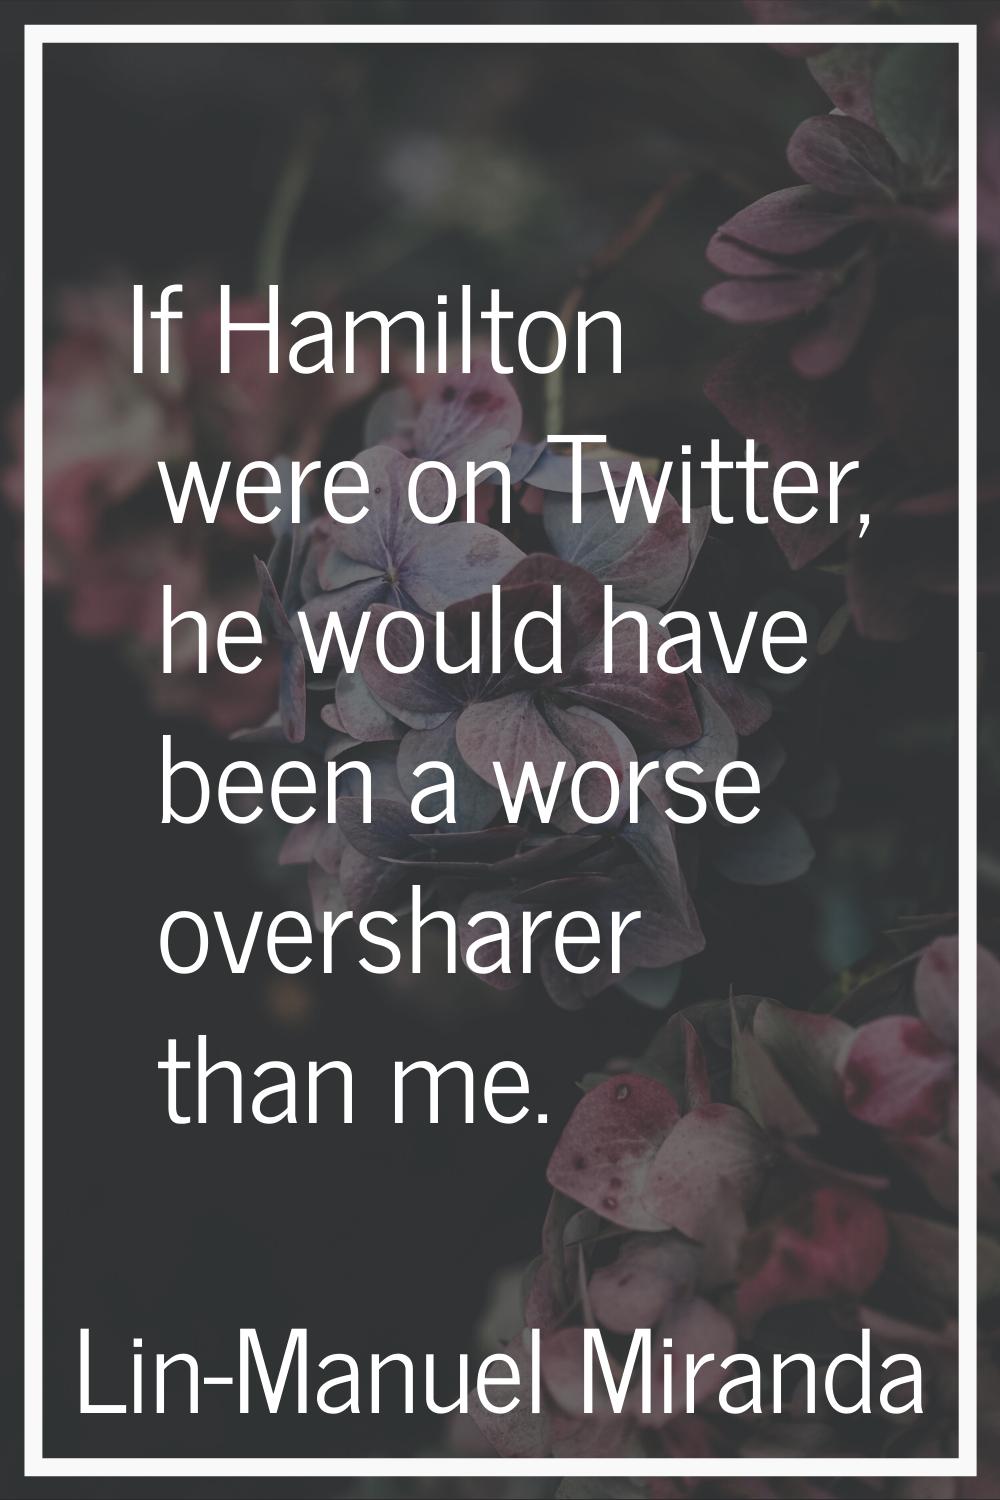 If Hamilton were on Twitter, he would have been a worse oversharer than me.